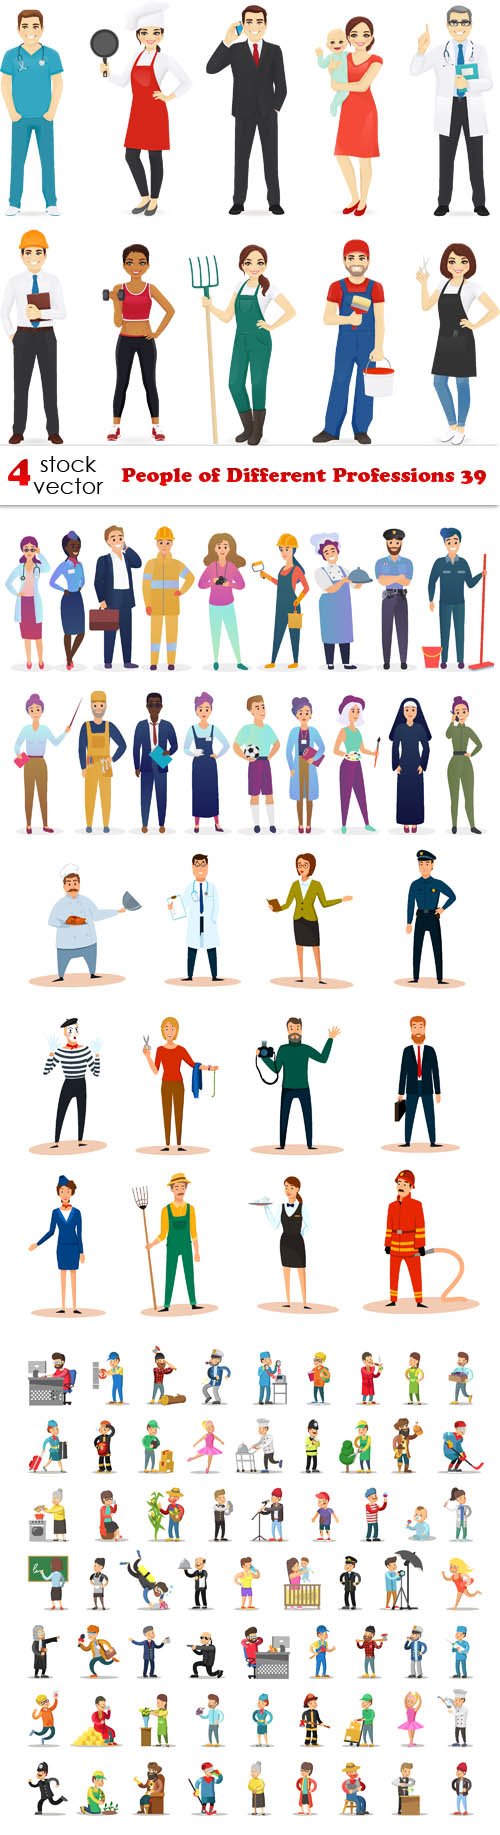 Vectors - People of Different Professions 39